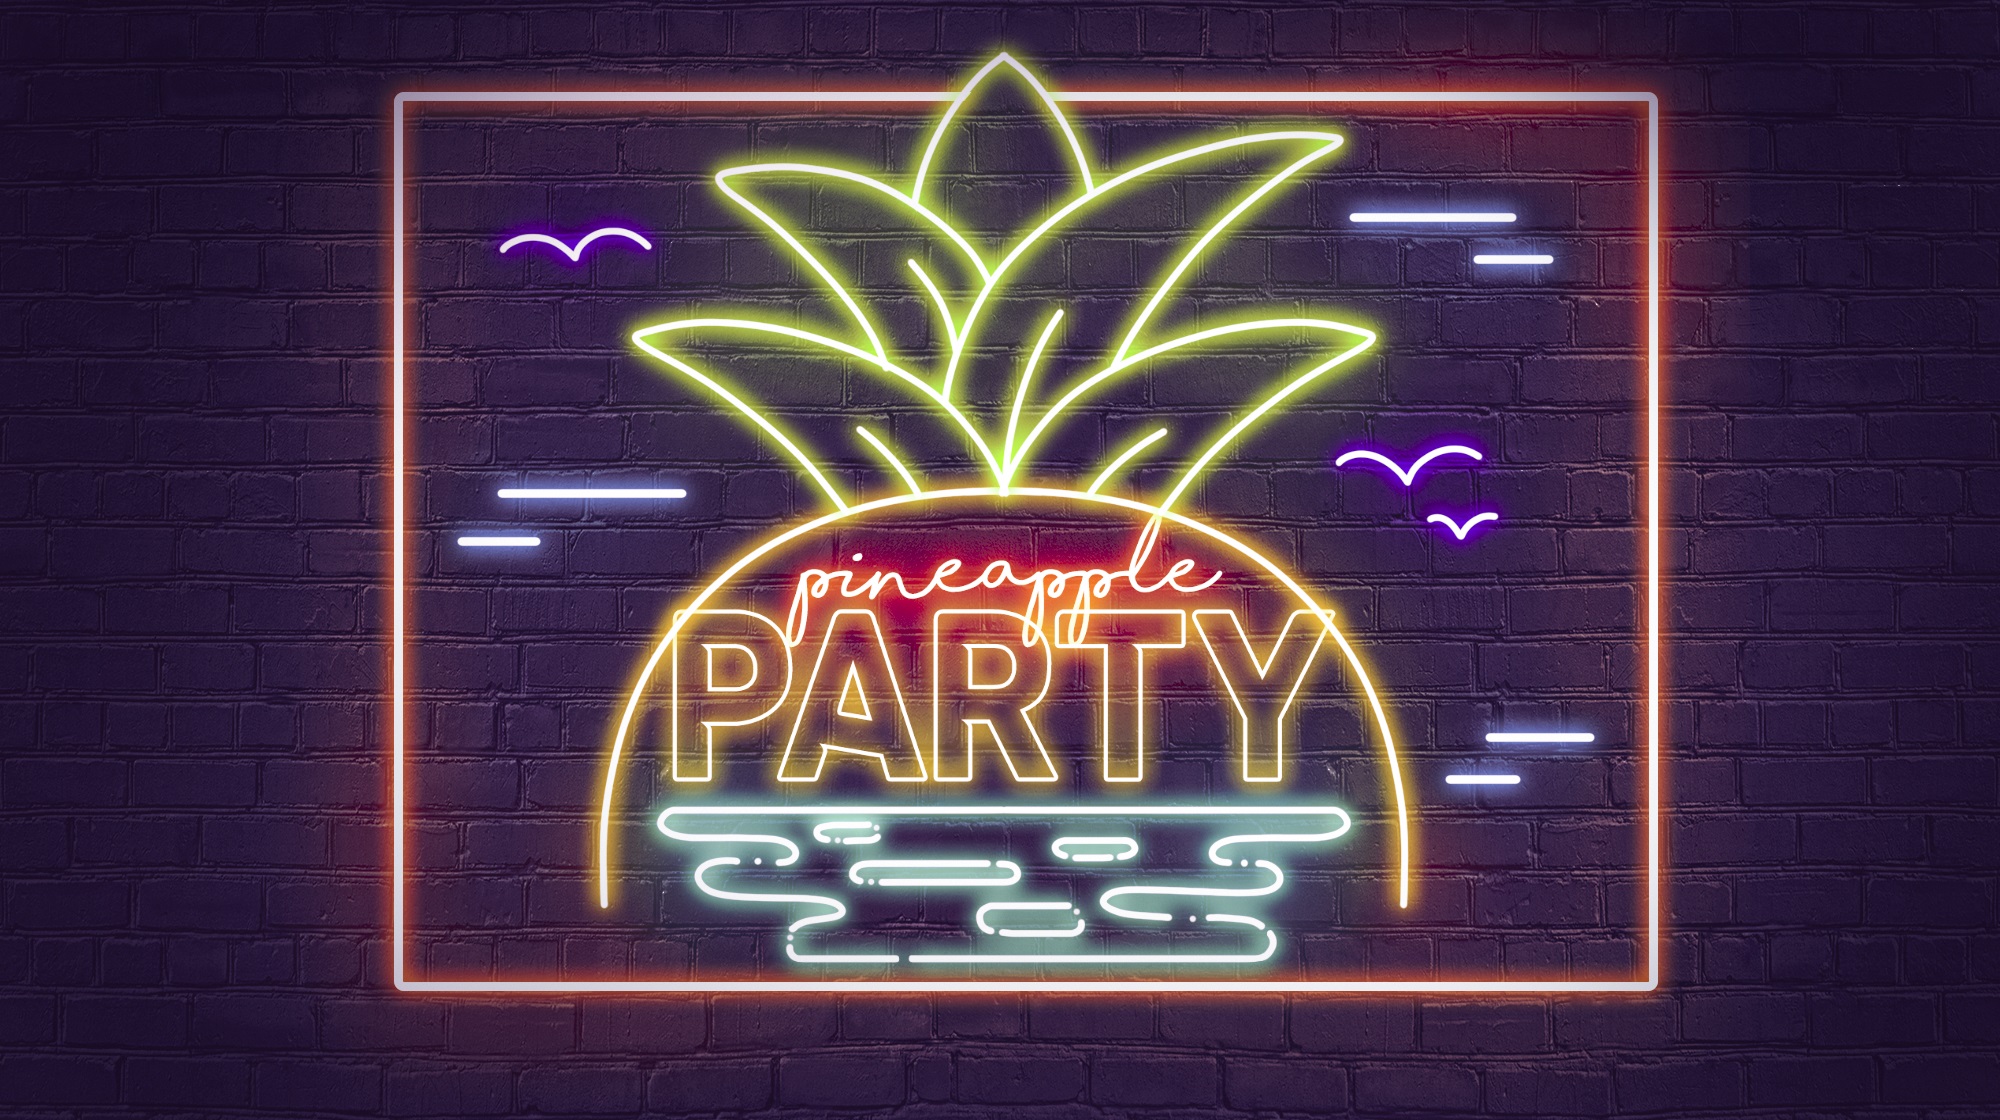 Pineapple Party - 'Dream Vacation'